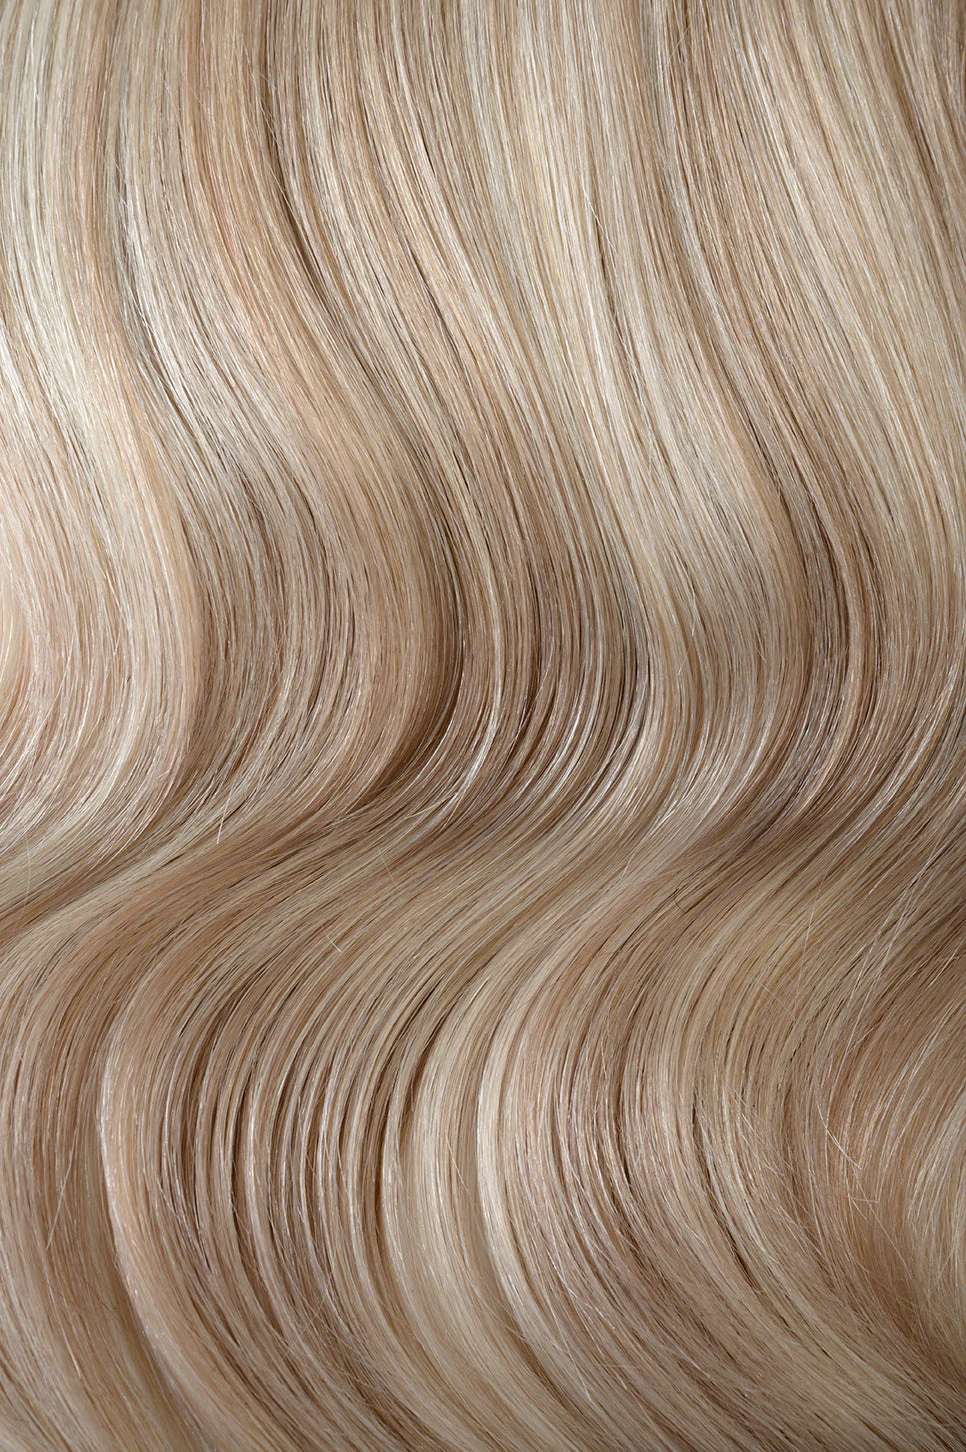 #18/60 Pearl Ash Blonde Highlights Hand Tied Weft Extensions